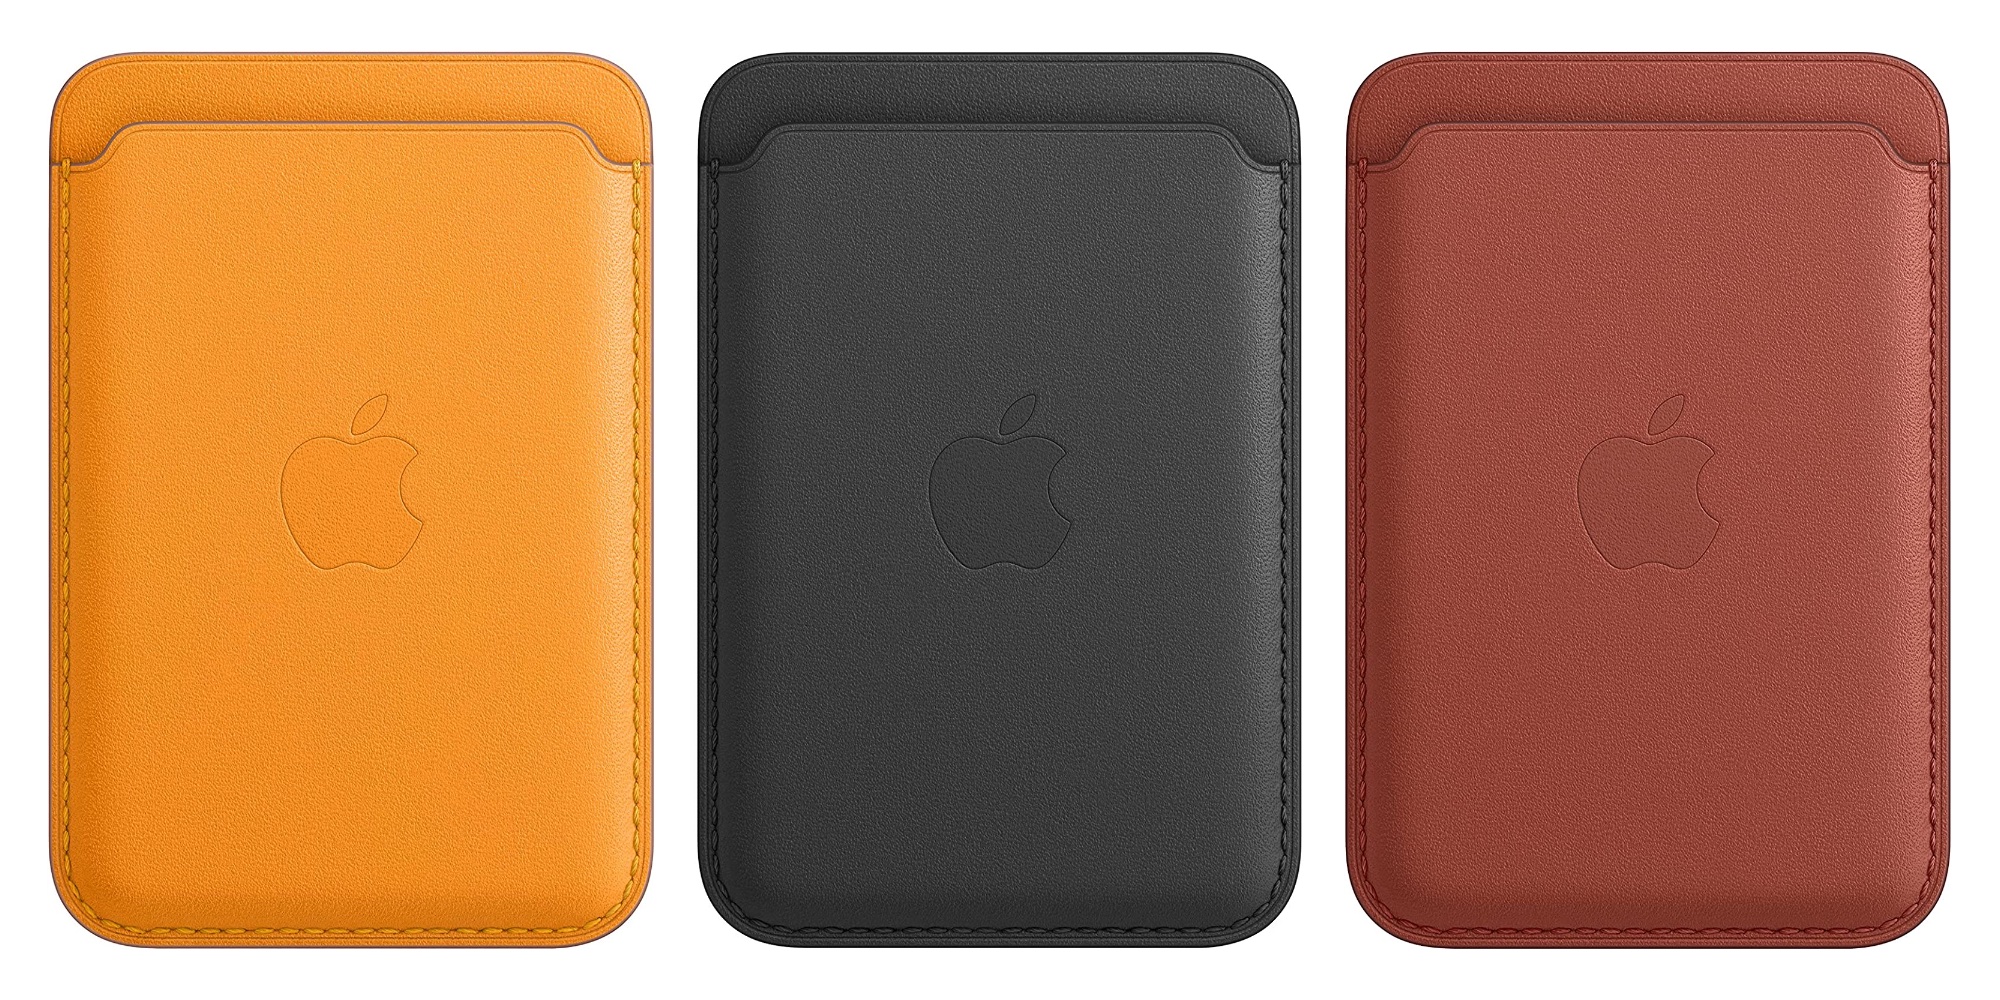 Hands-on: iPhone Leather Wallet with MagSafe - 9to5Mac